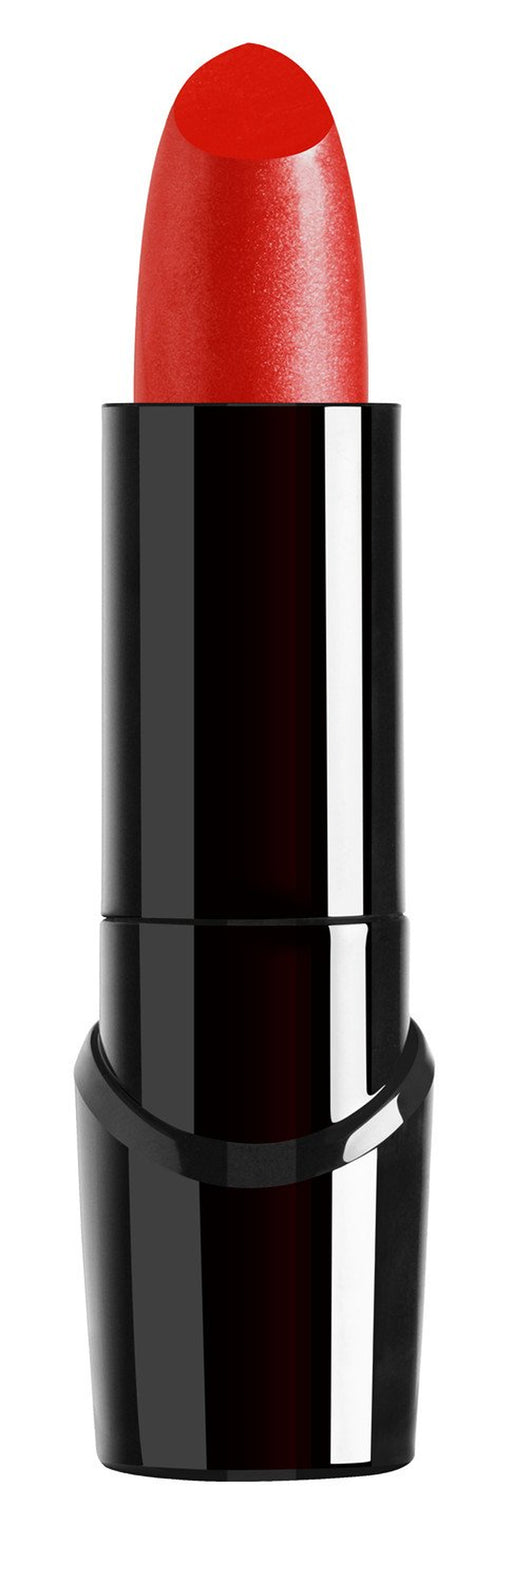 Wet N Wild Silk Finish Lipstick, Hydrating Rich Buildable Lip Color, Formulated with Vitamins A,E, & Macadamia for Ultimate Hydration, Cruelty-Free & Vegan - Cherry Frost